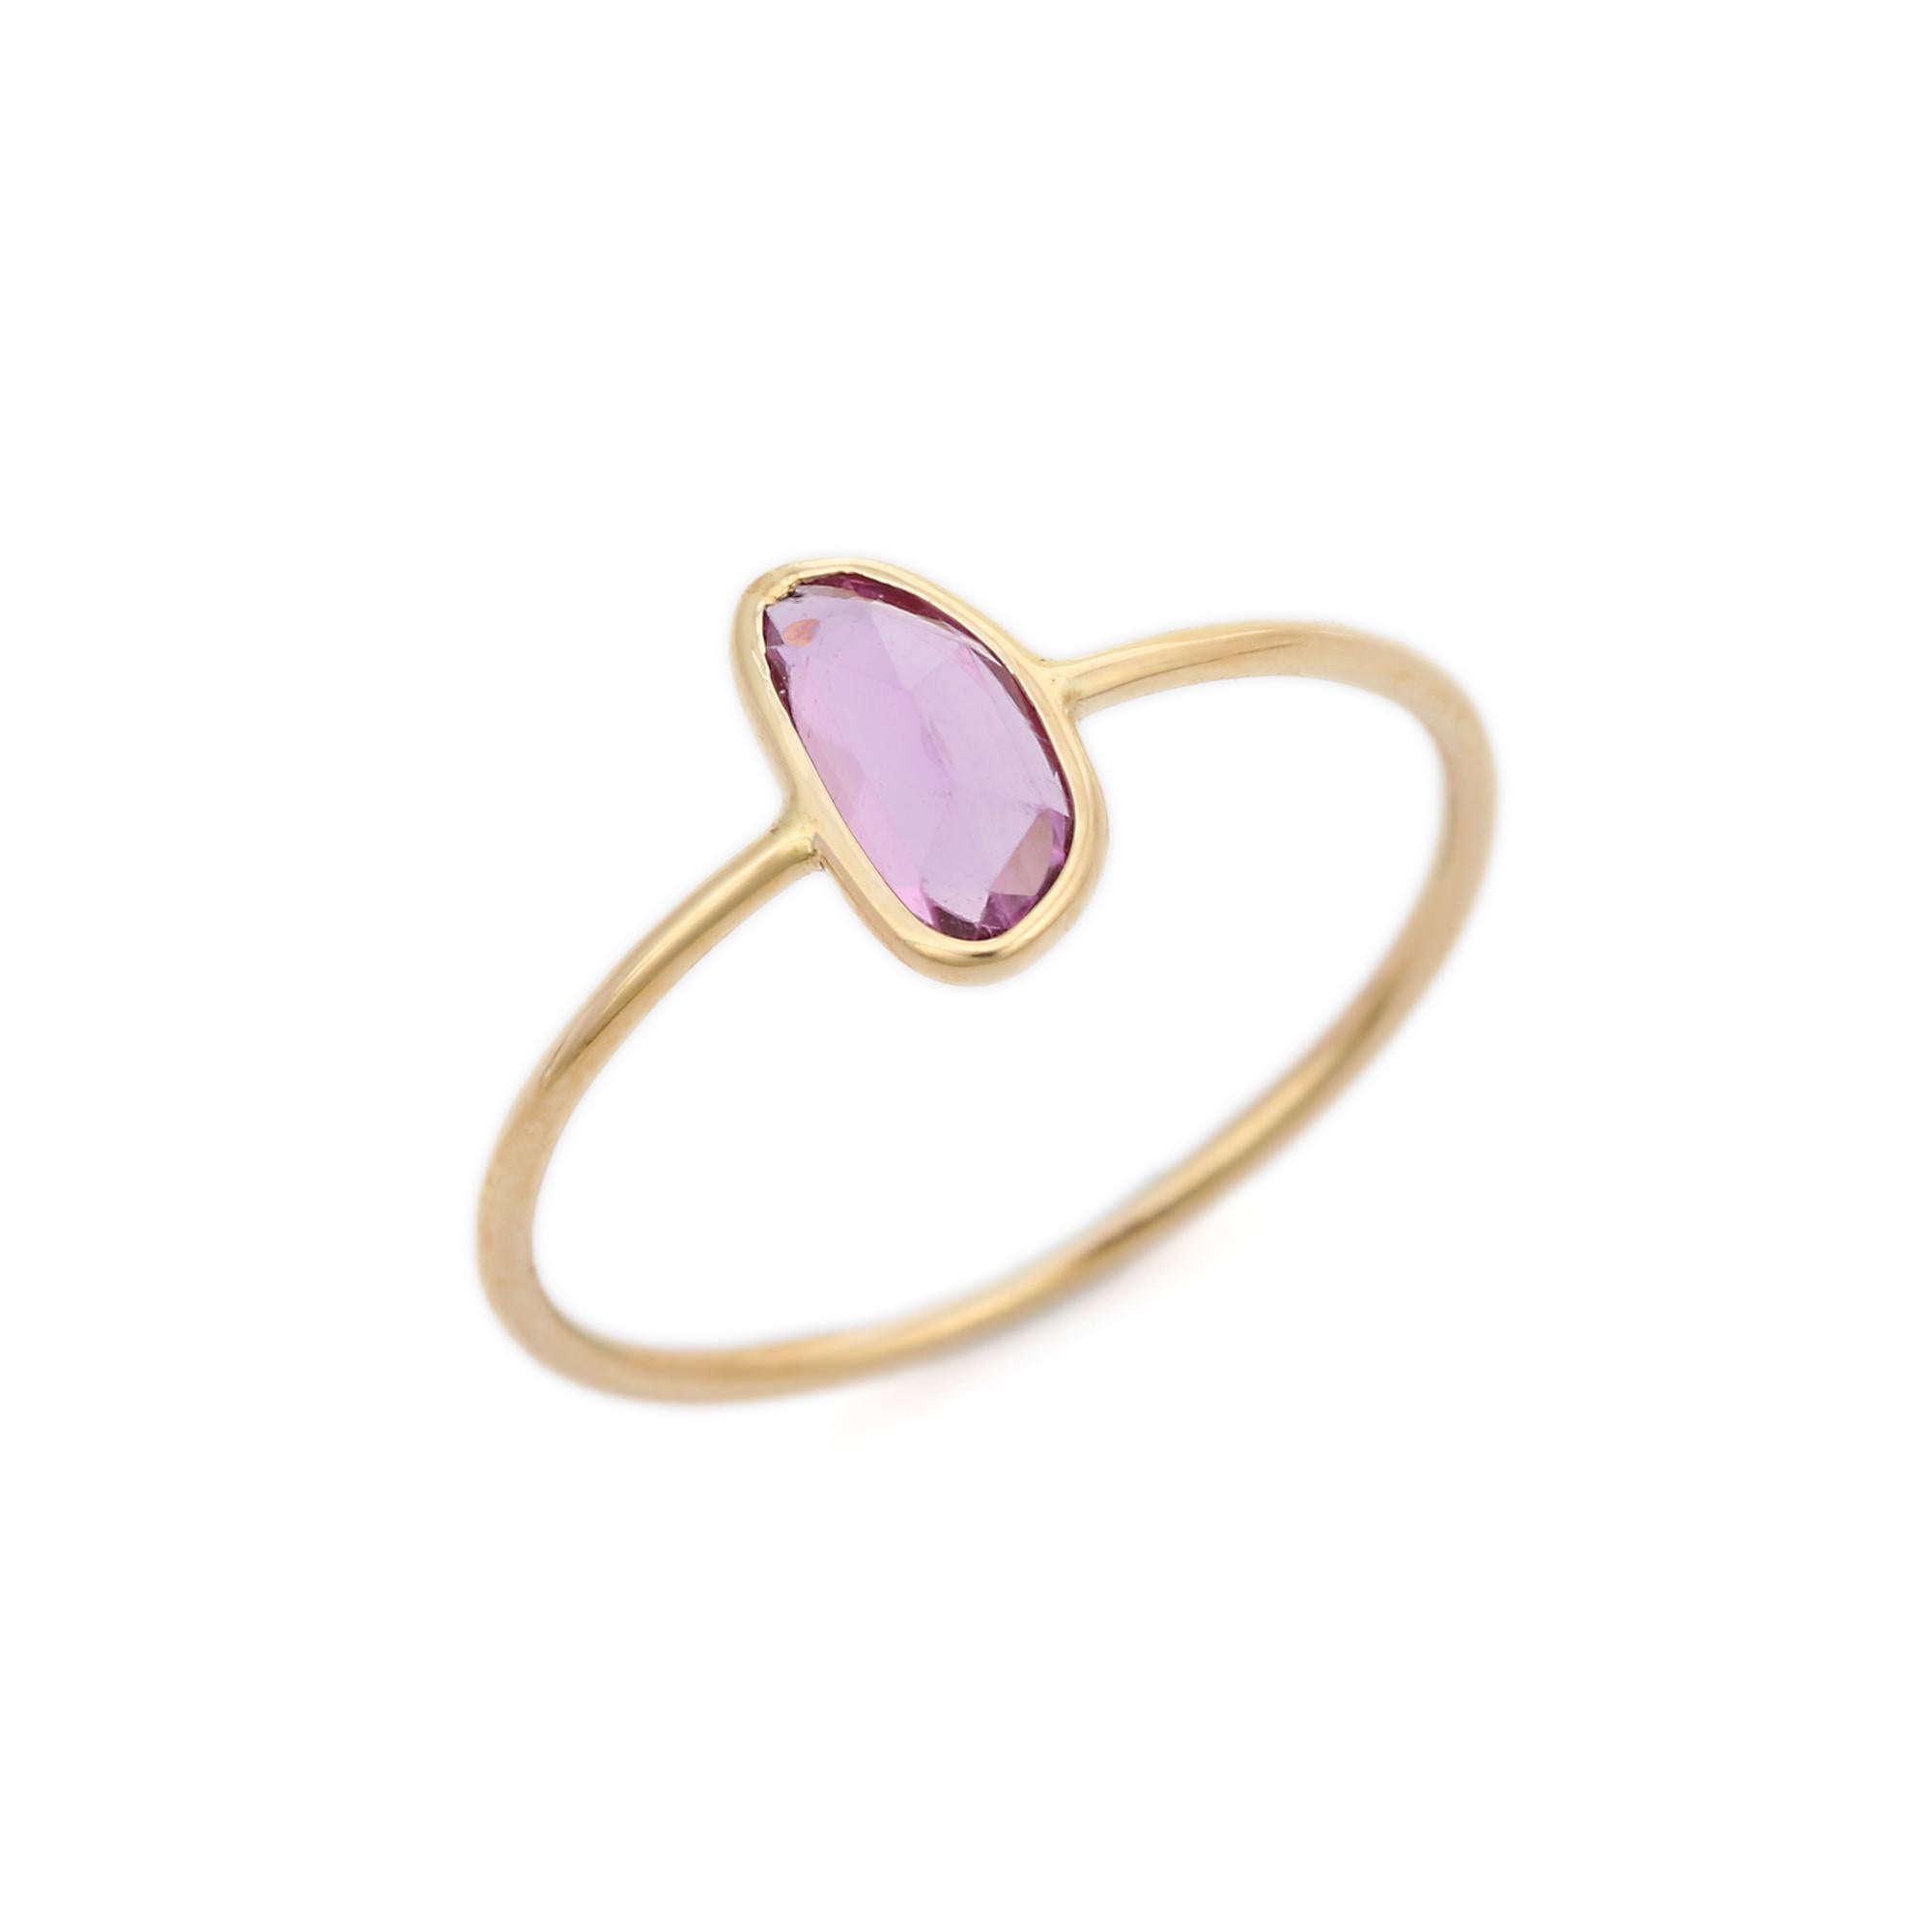 For Sale:  Handcrafted Pink Sapphire Gemstone Single Stone Ring in 14 Karat Yellow Gold 5